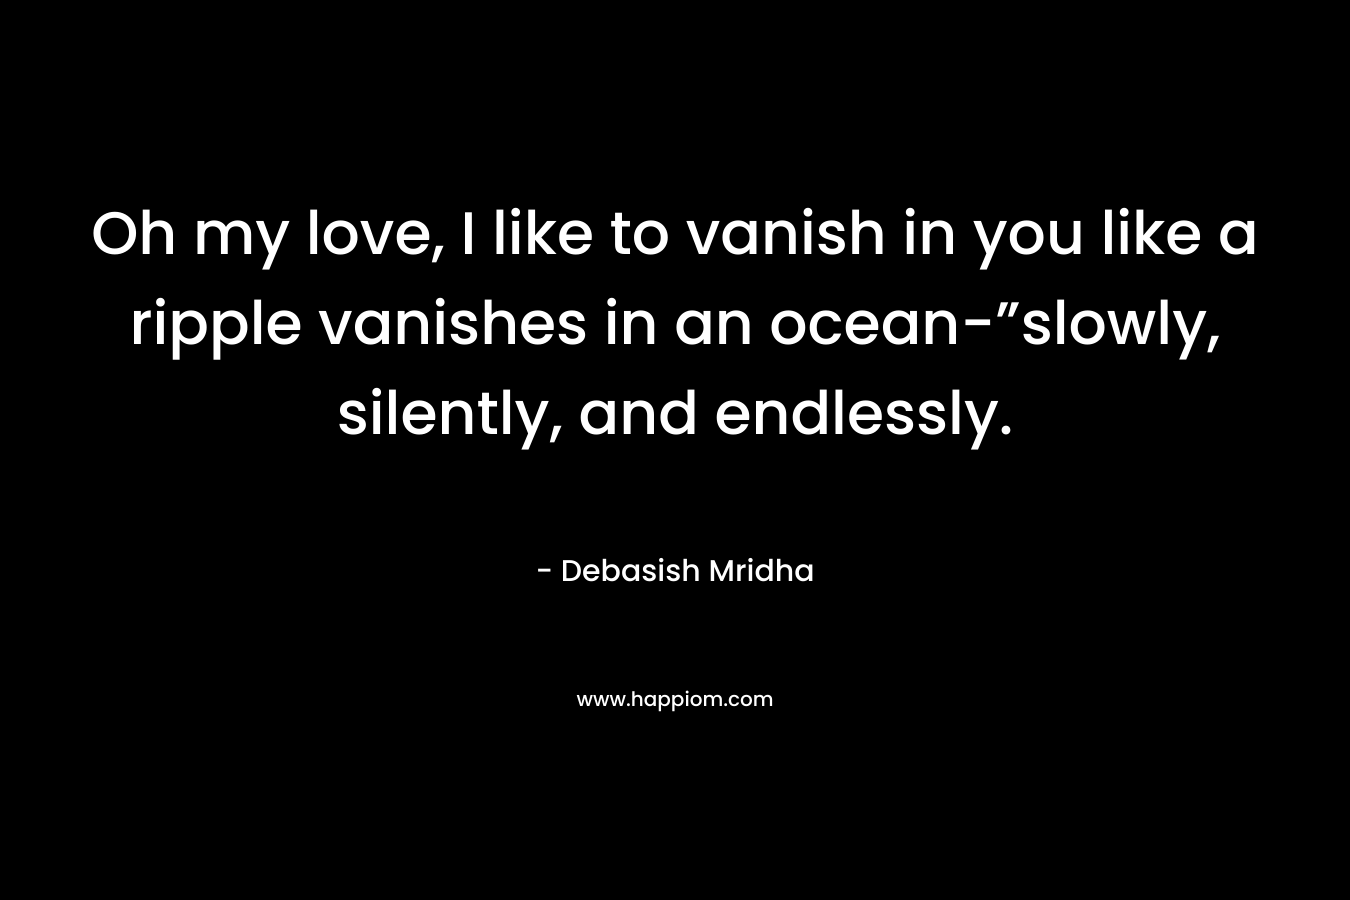 Oh my love, I like to vanish in you like a ripple vanishes in an ocean-”slowly, silently, and endlessly.